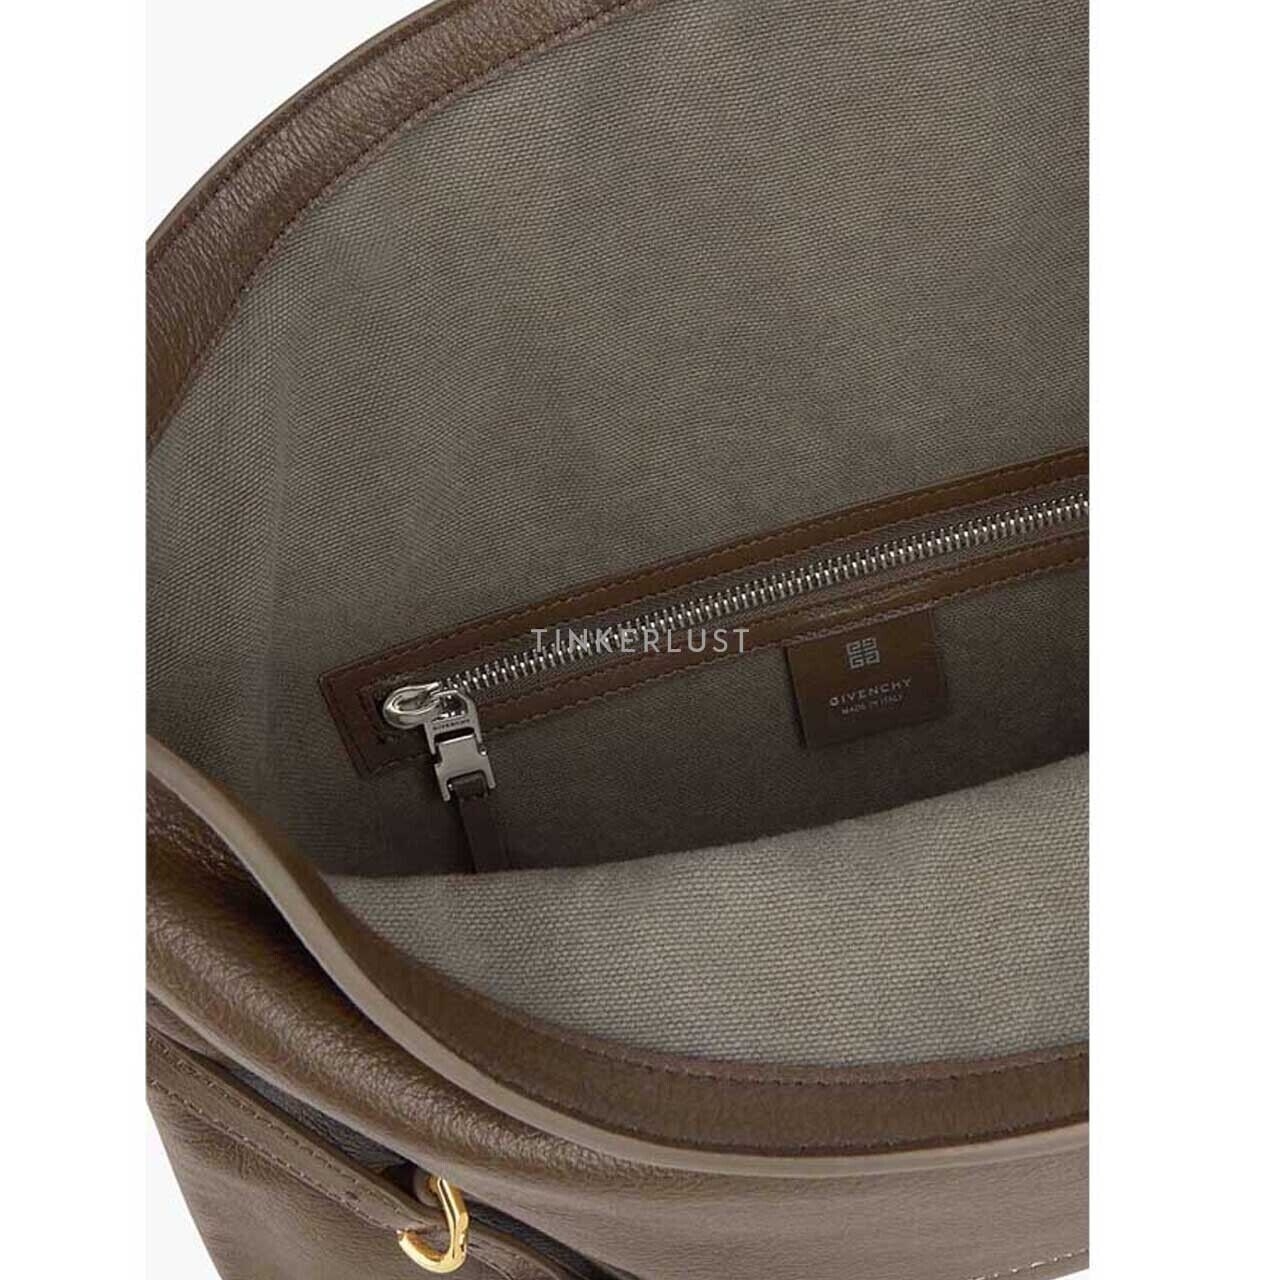 Givenchy Medium Voyou Shoulder Bag in Taupe Tumbled Calfskin Leather